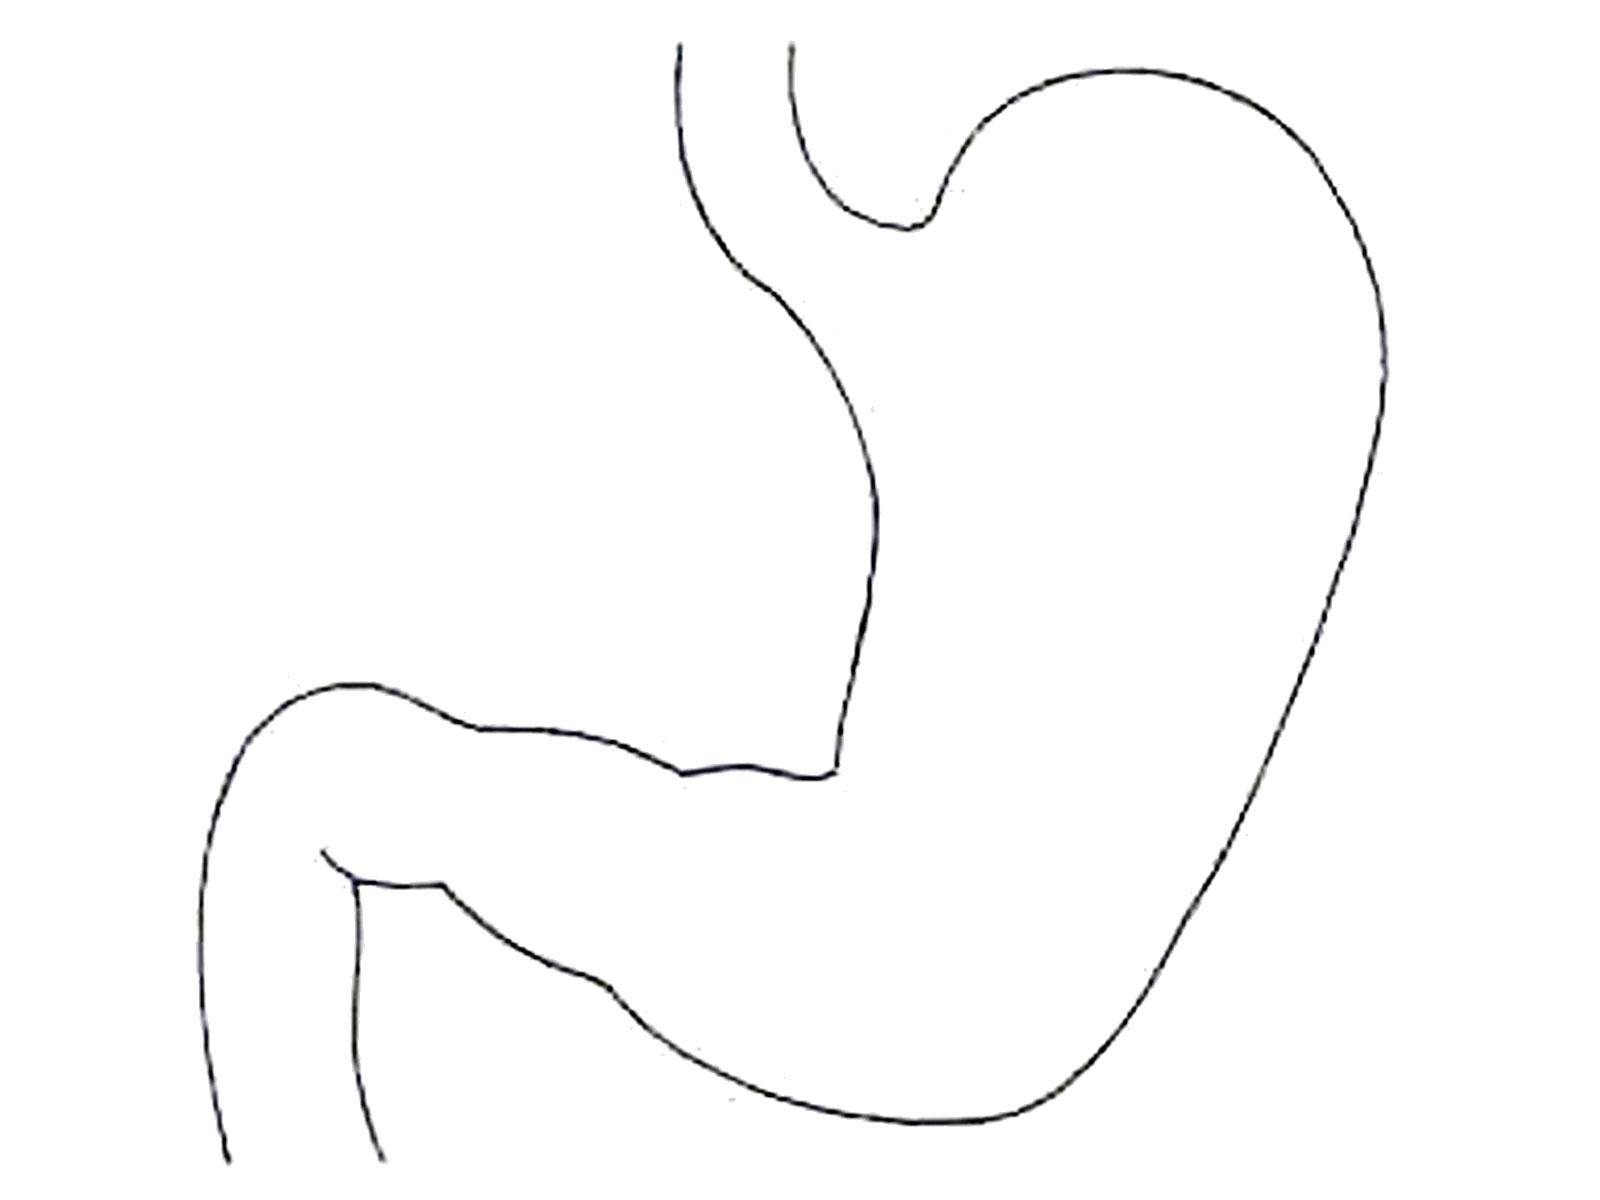 Coloring Stomach. Category The structure of the body. Tags:  Organ, stomach.